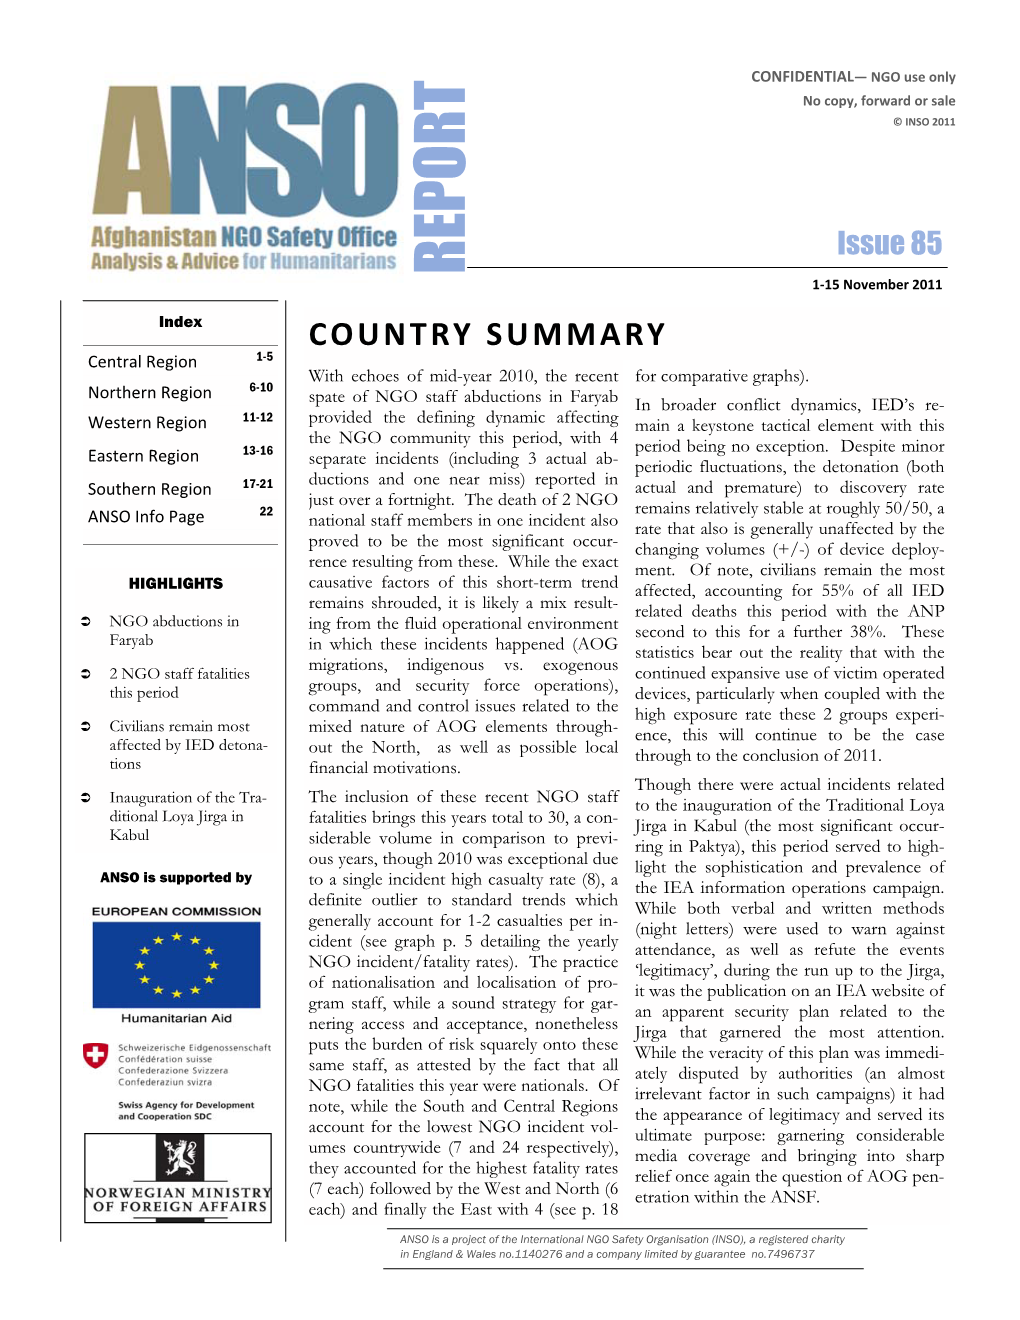 The ANSO Report (1-15 November 2011)